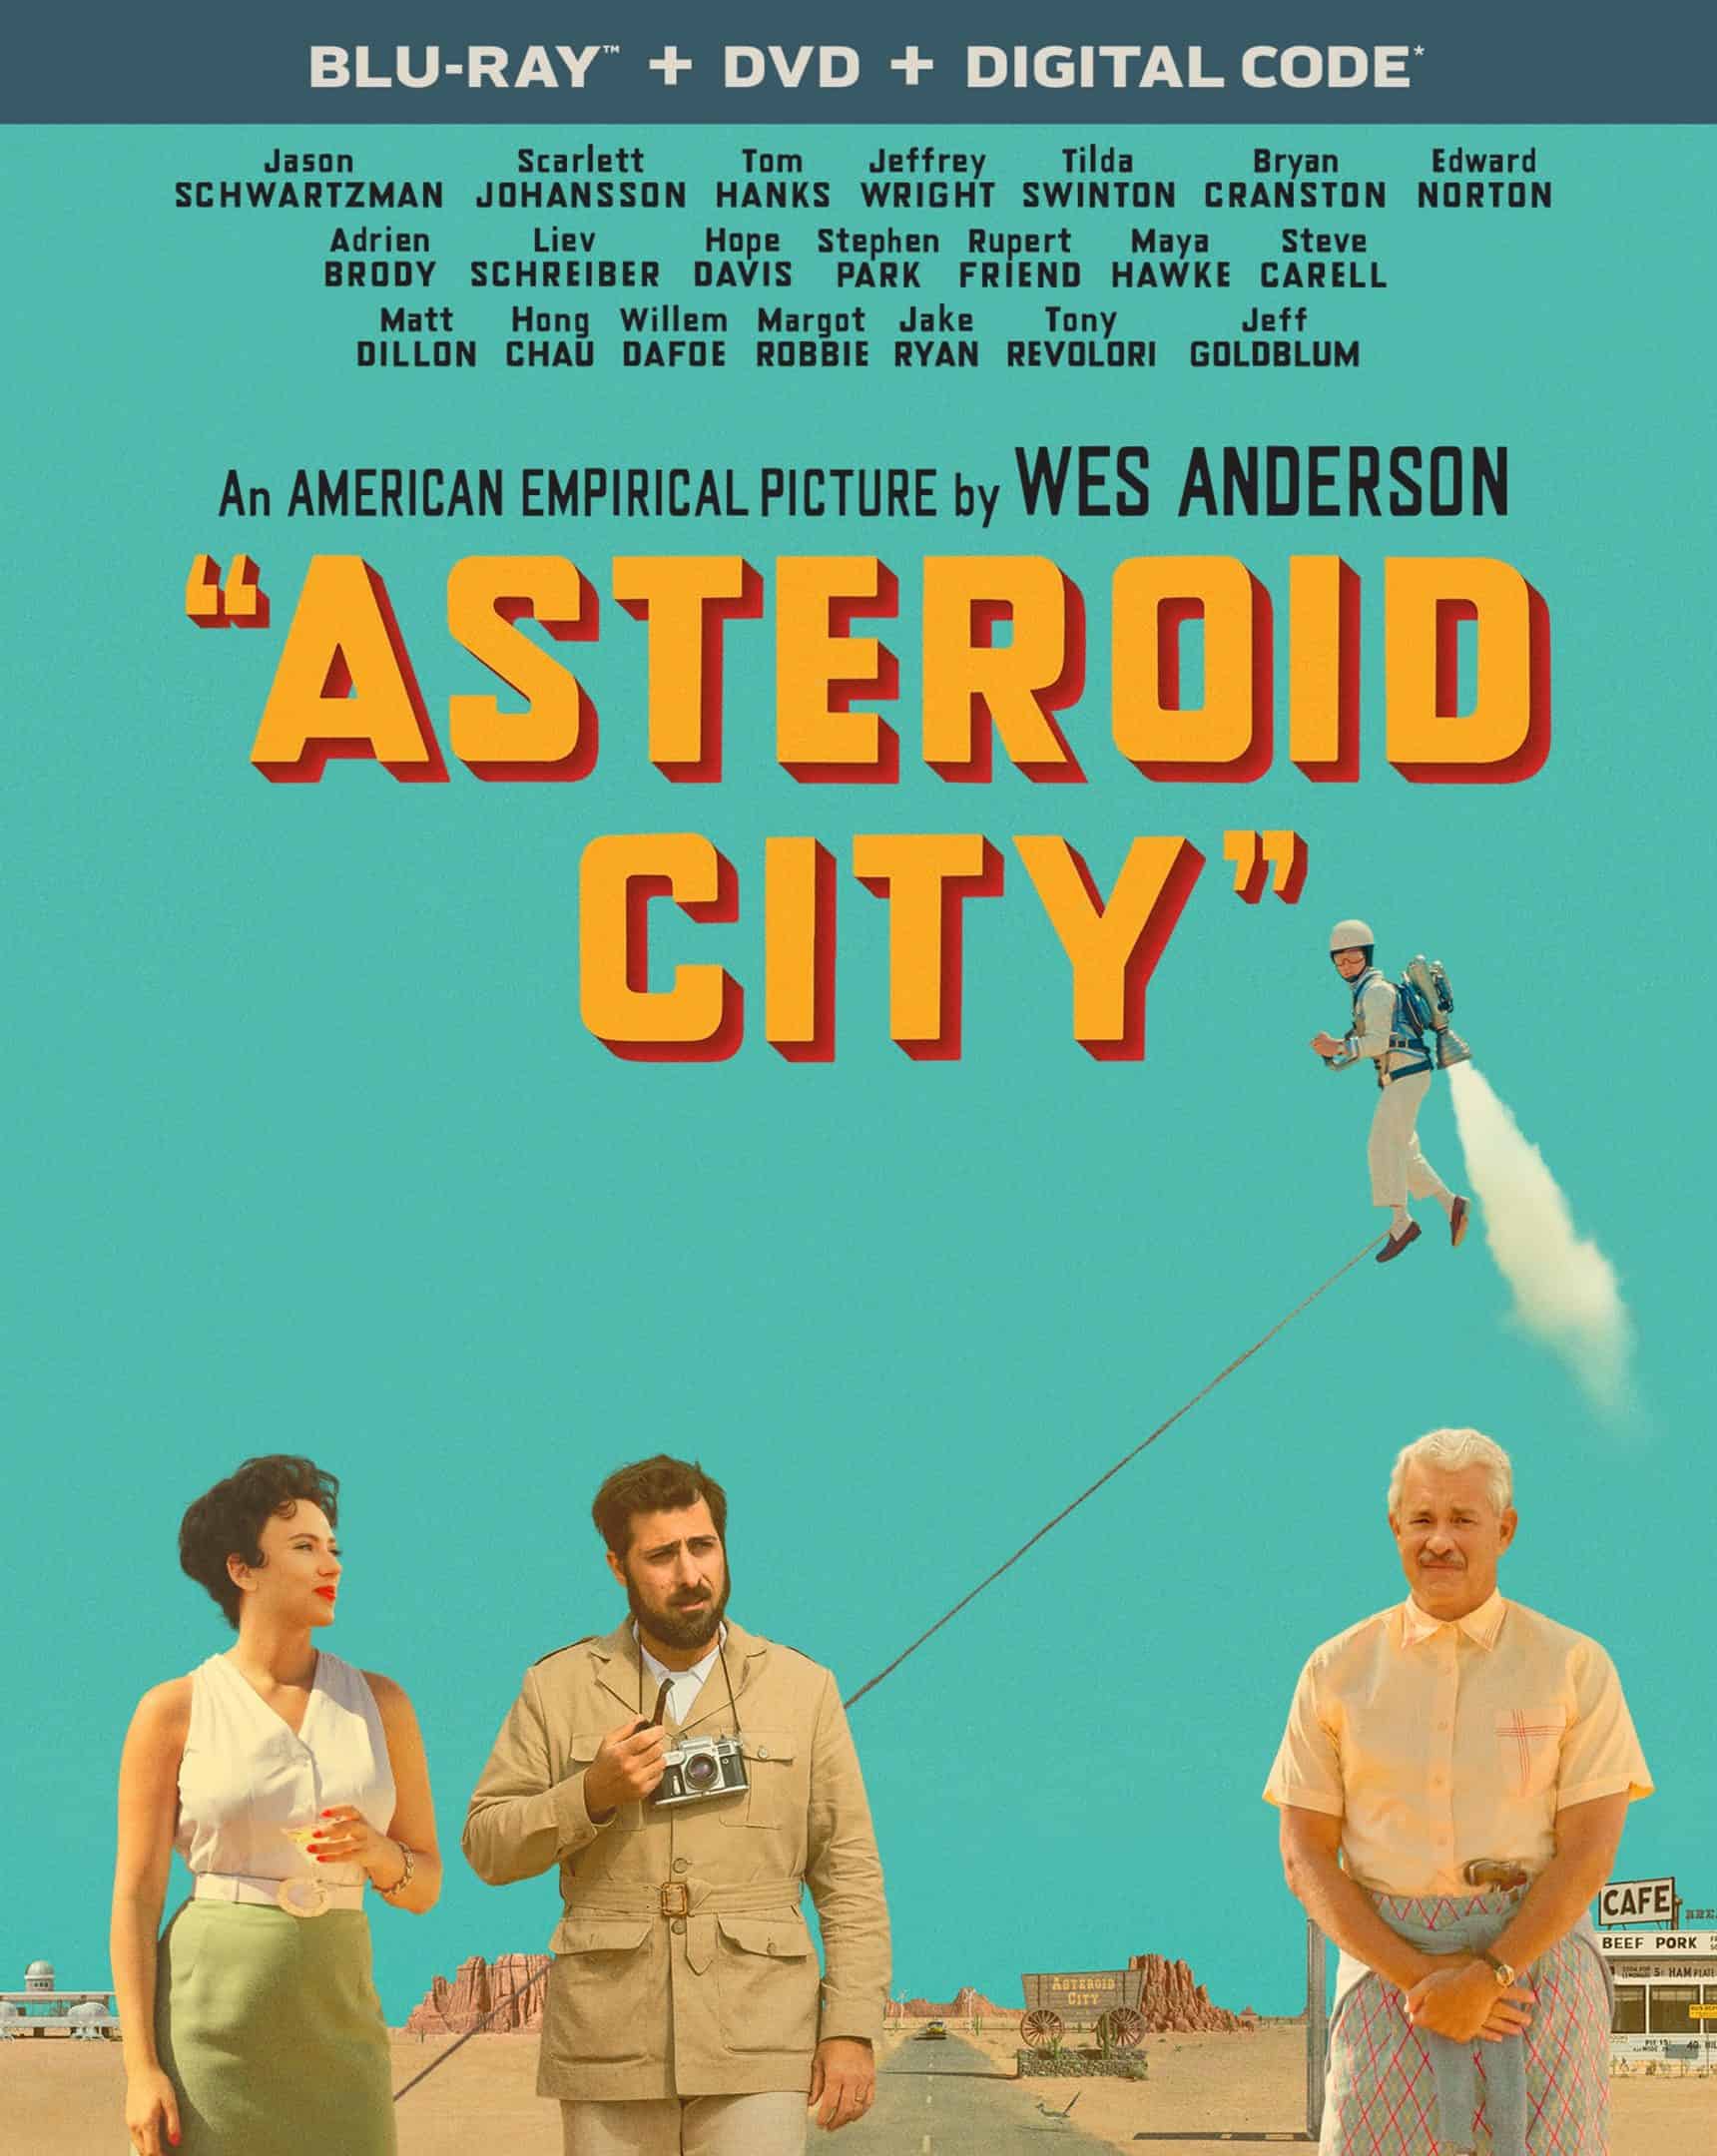 Star-Studded Comedy ASTEROID CITY with Jason Schwartzman, Scarlett  Johansson, and Tom Hanks Arrives on Digital August 11 and on Blu-ray/DVD  August 15